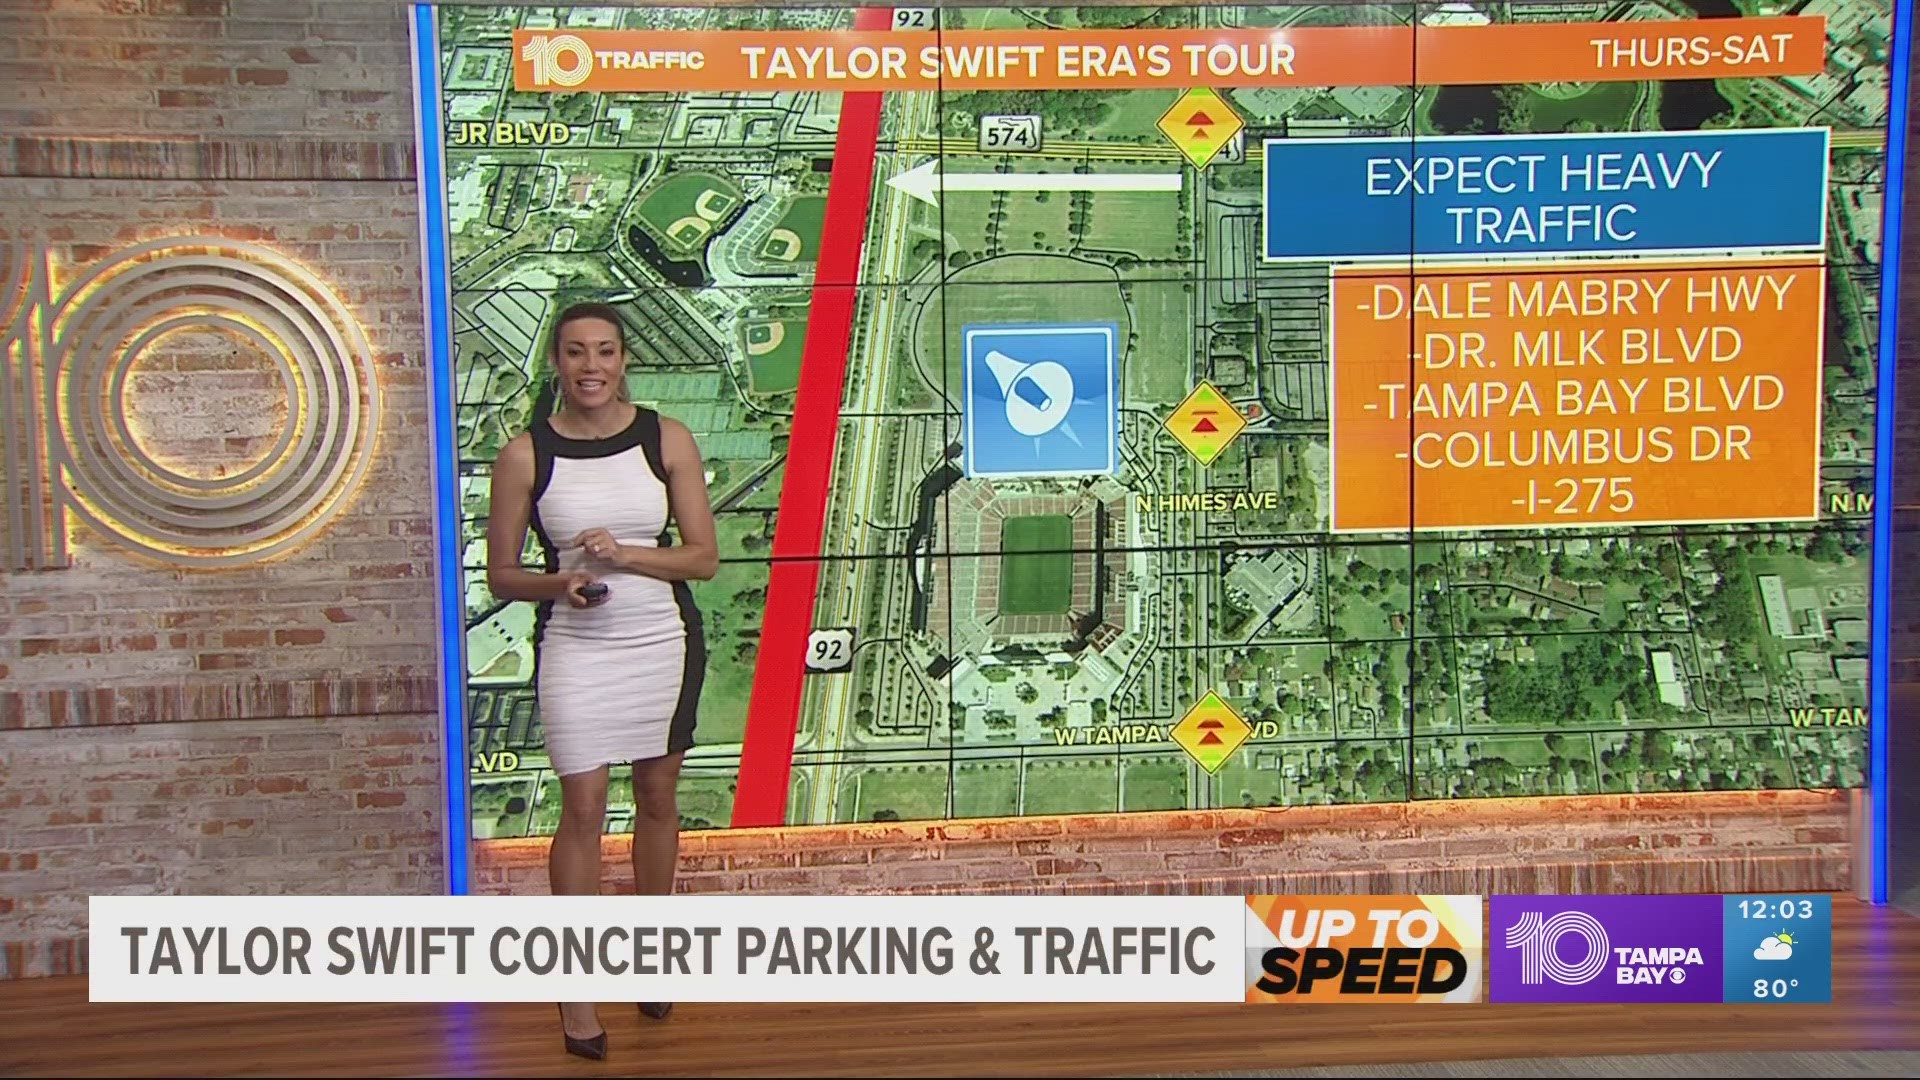 Traffic Parking For Taylor Swift In